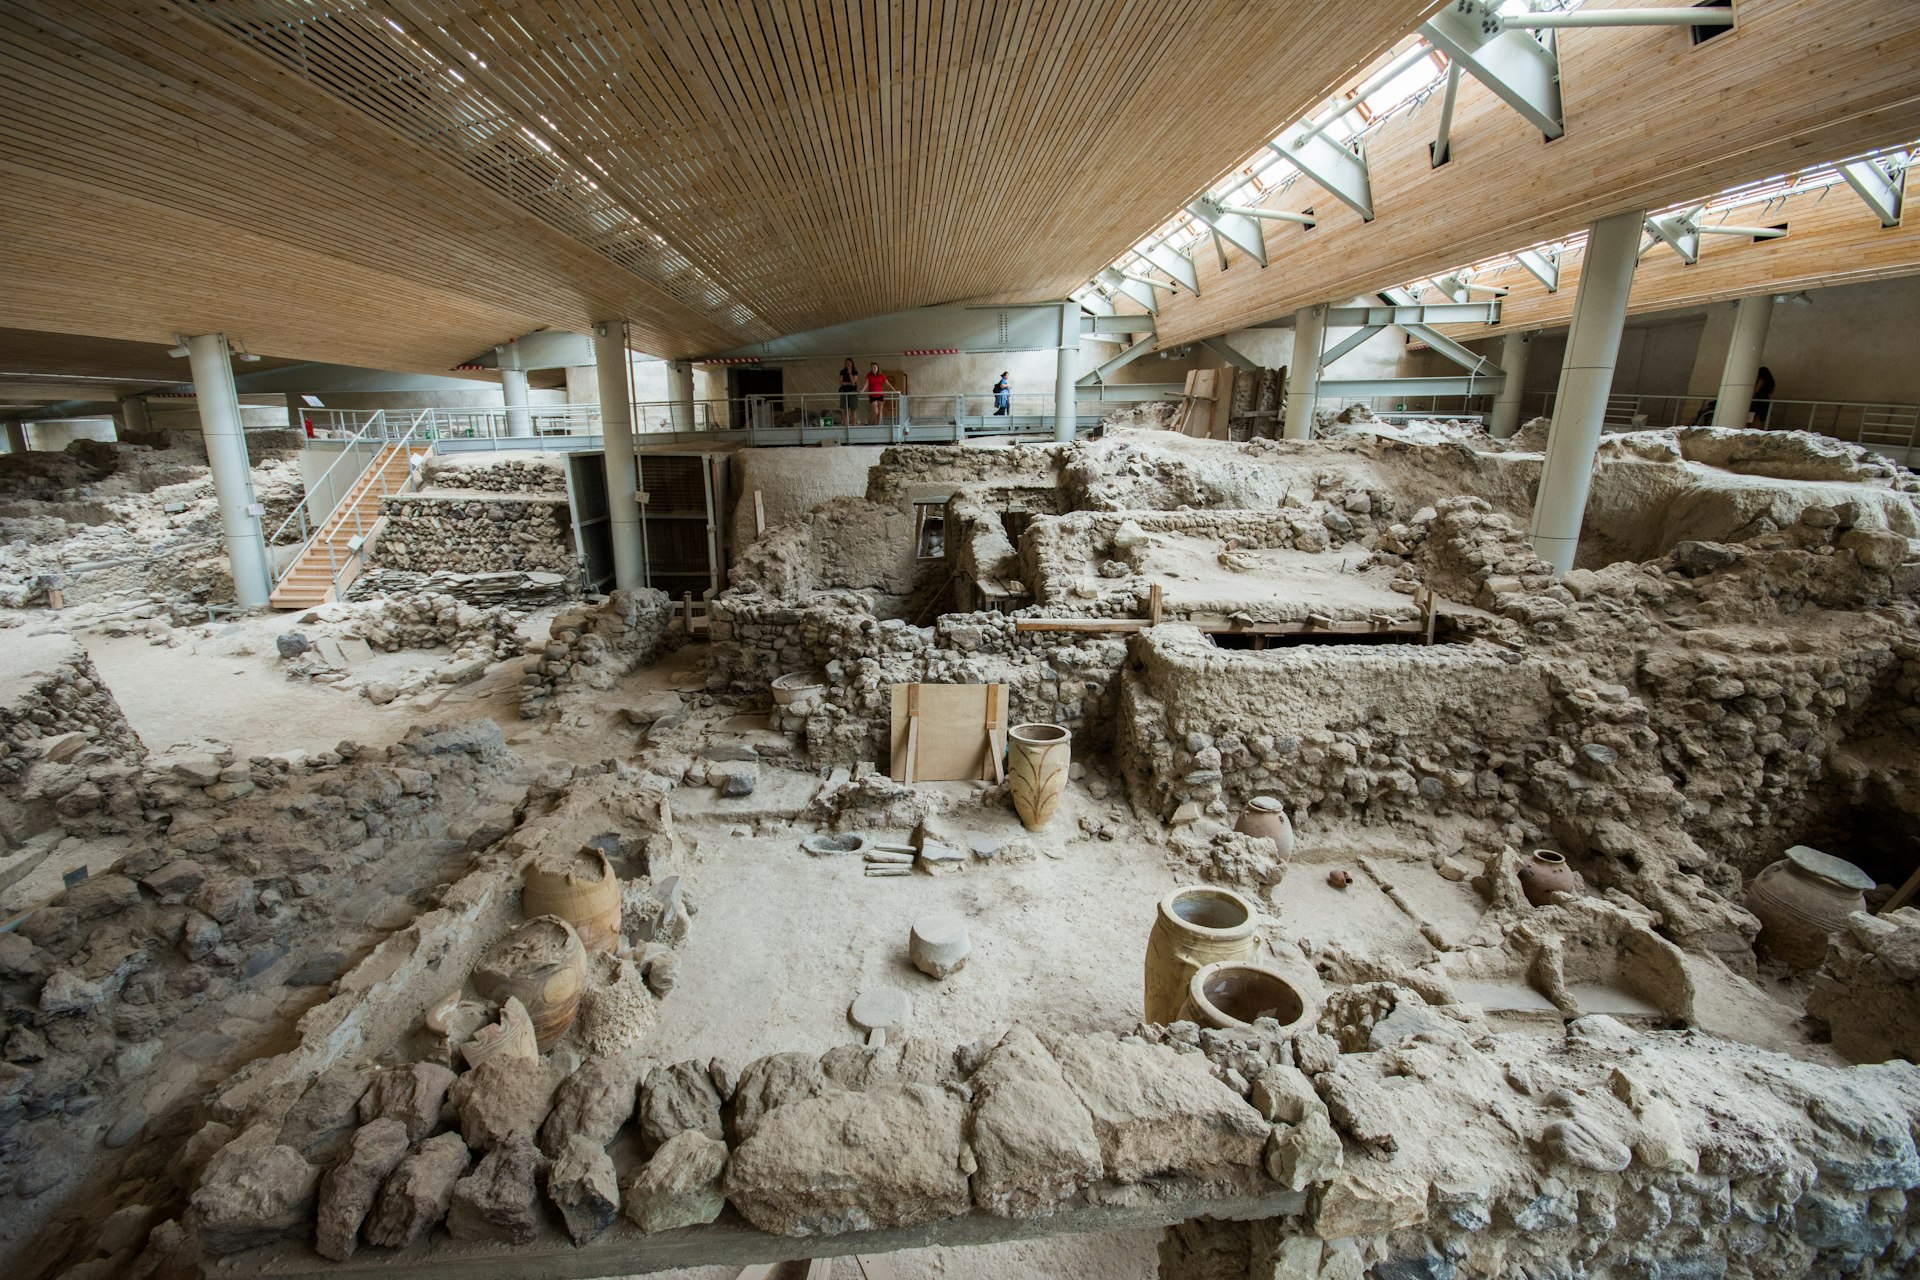 A vast archaeological site with ancient pots and walls on display